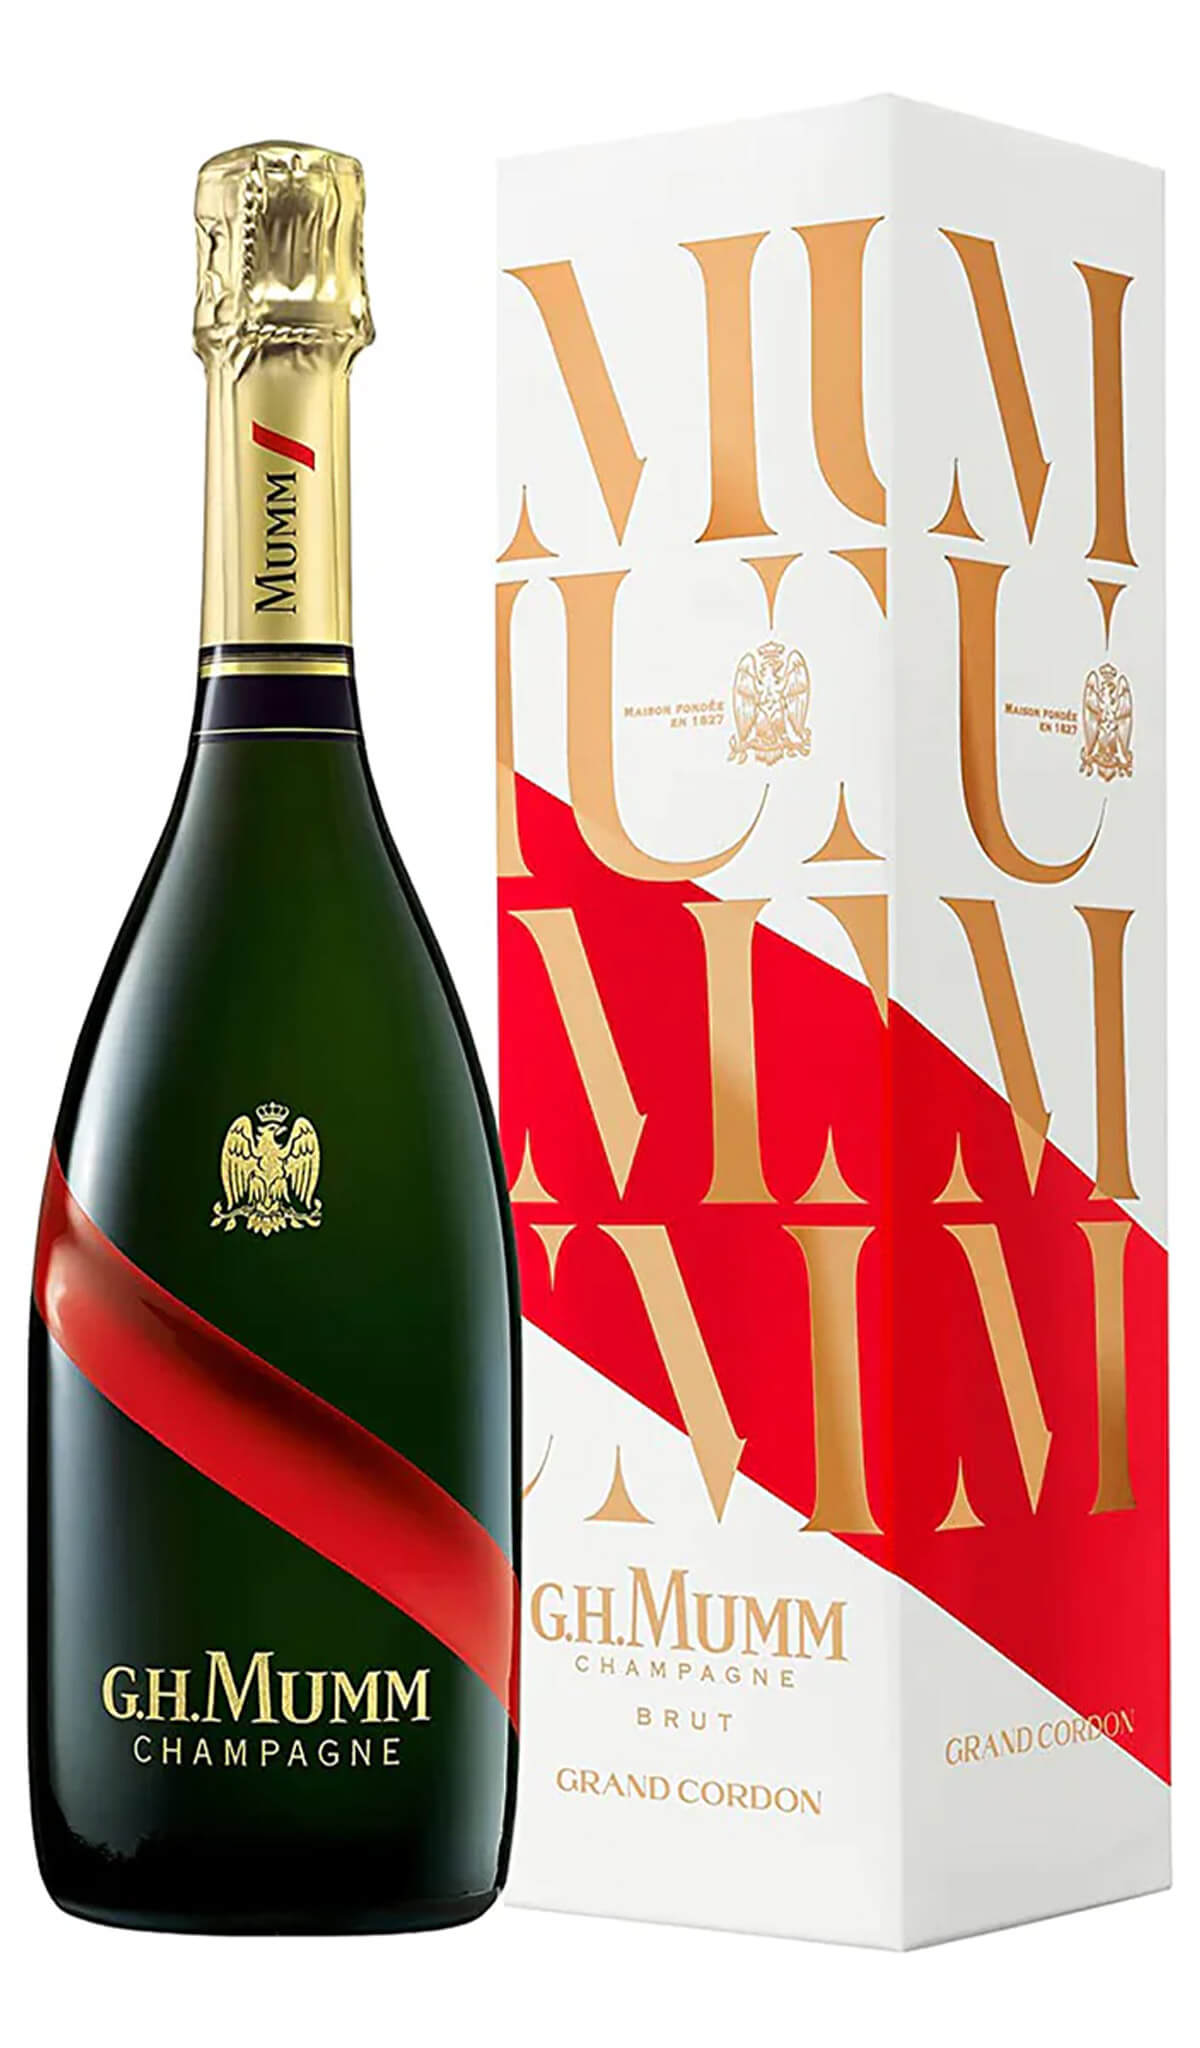 Find out more or buy Mumm Grand Cordon Brut Champagne NV 750mL (Gift Boxed) online at Wine Sellers Direct - Australia’s independent liquor specialists.